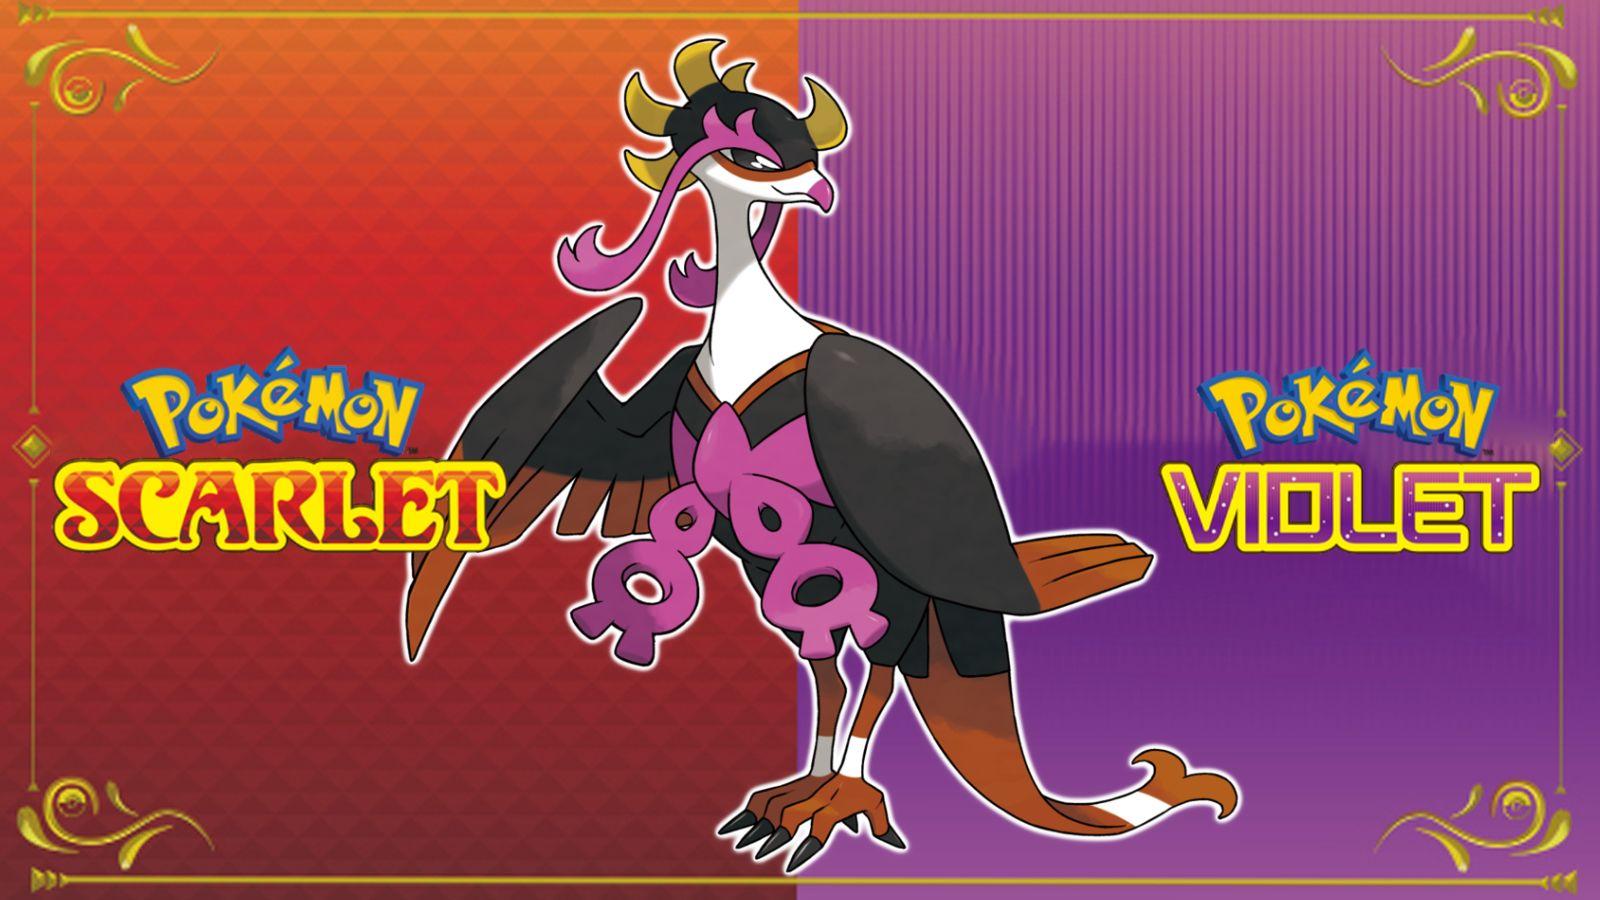 Every New Pokemon In The Teal Mask DLC For Scarlet & Violet